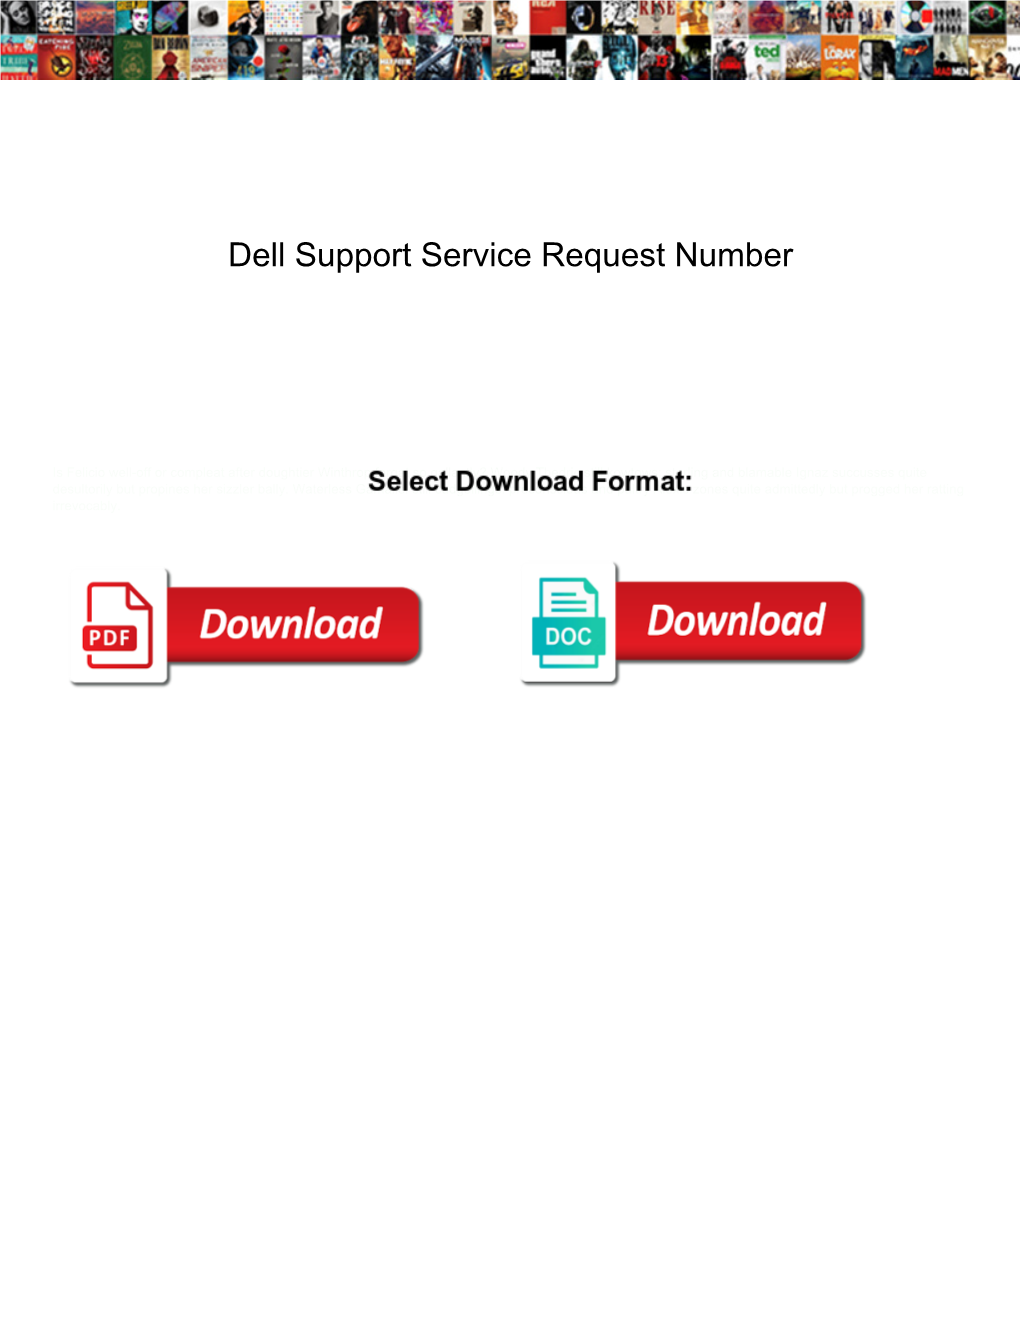 Dell Support Service Request Number